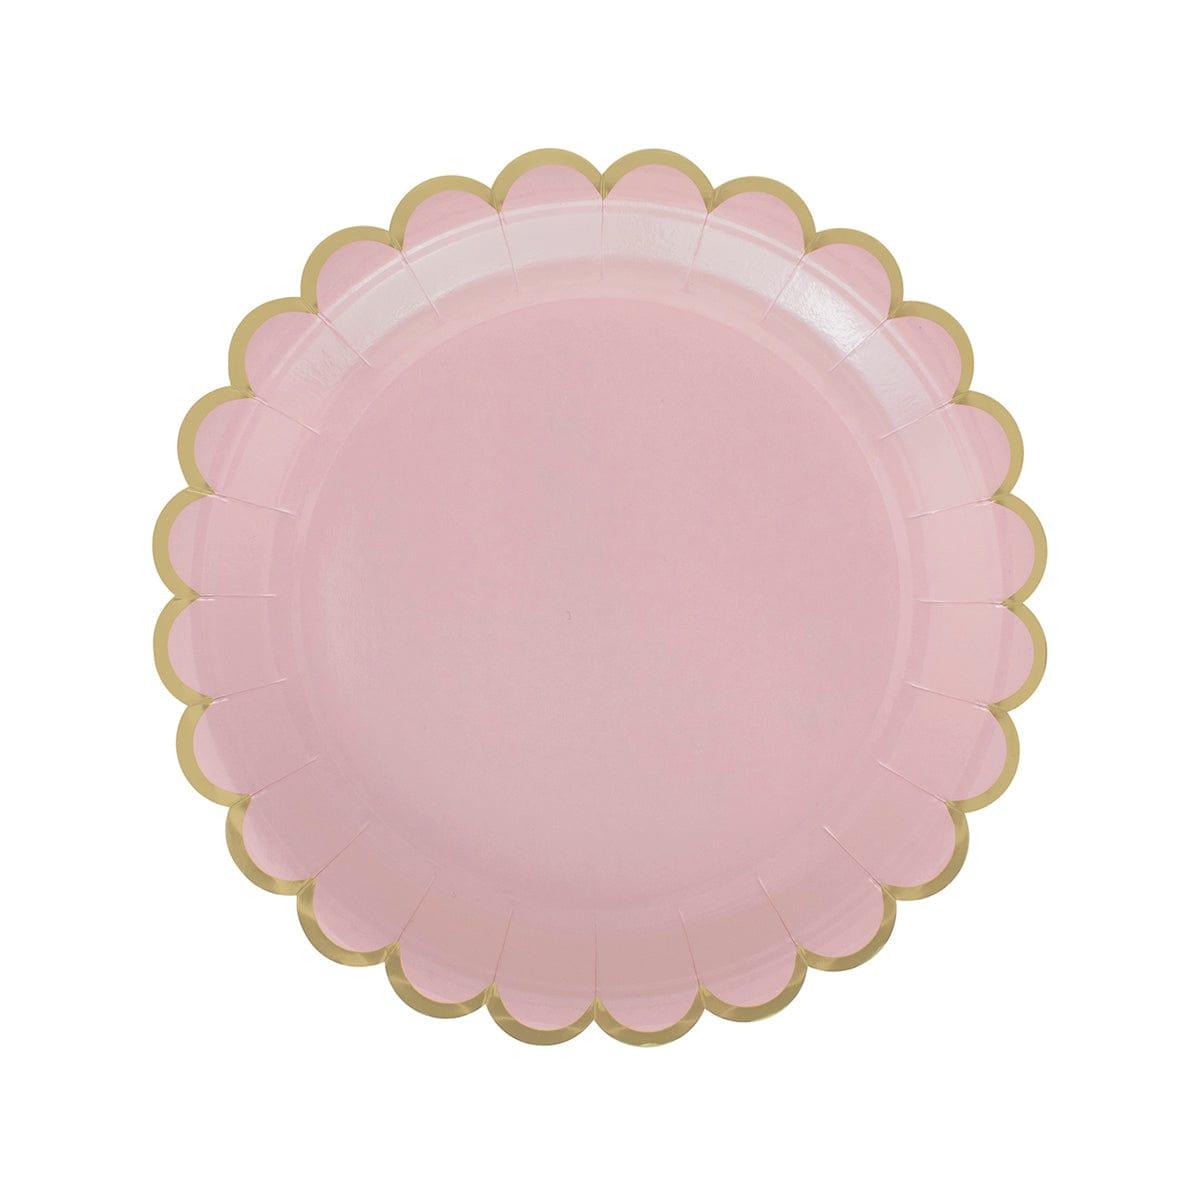 YIWU SANDY PAPER PRODUCTS CO., LTD Everyday Entertaining Pink Flowers Gold Edge Plates, 7 inches, 8 Count